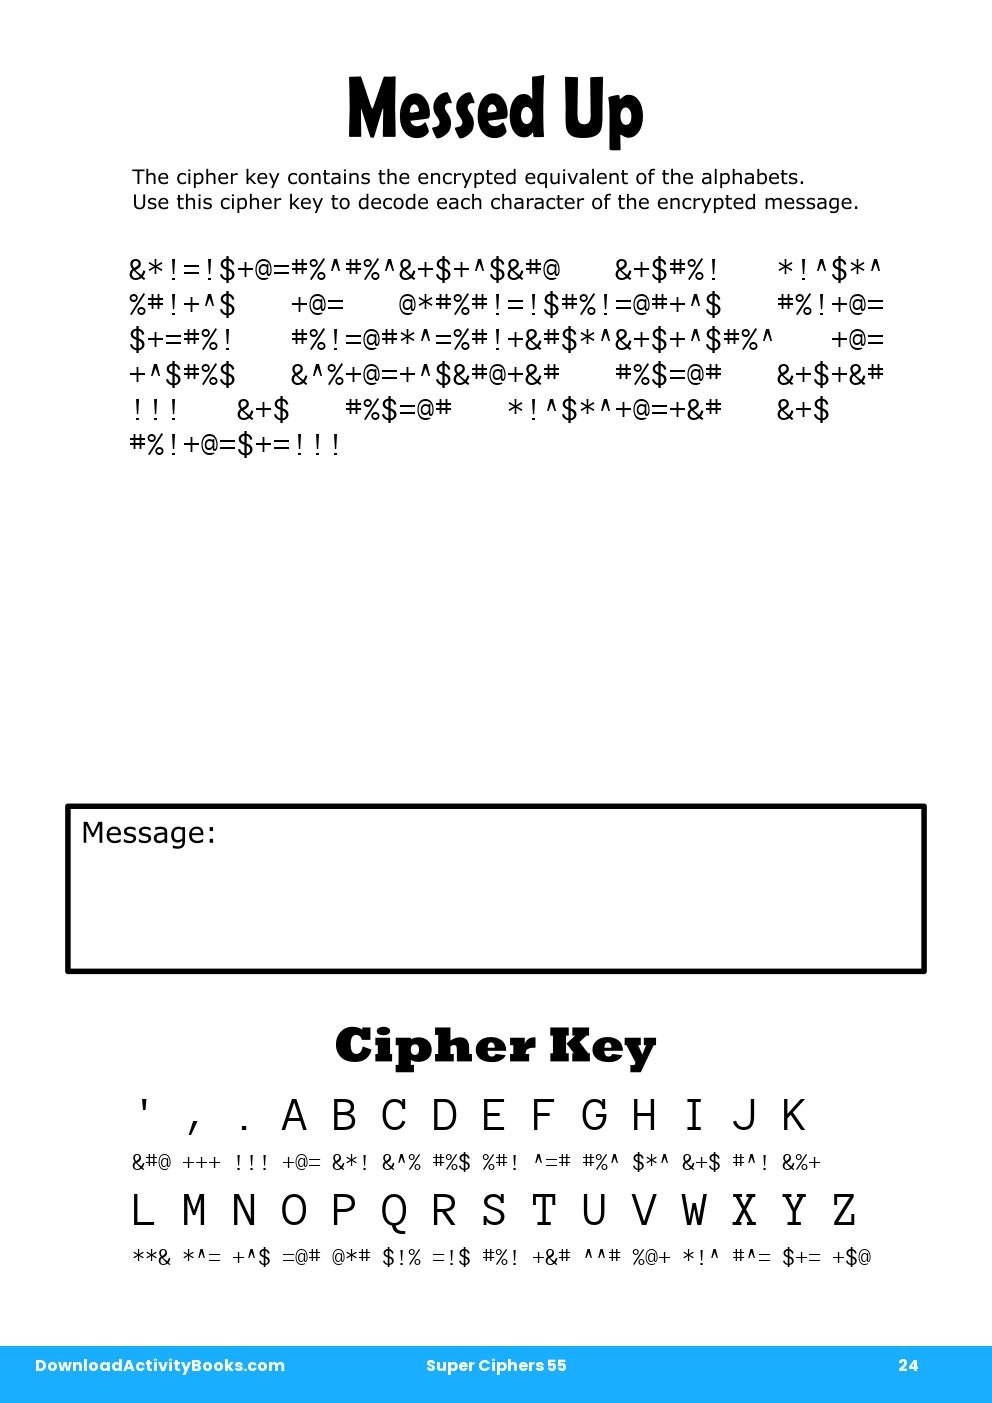 Messed Up in Super Ciphers 55